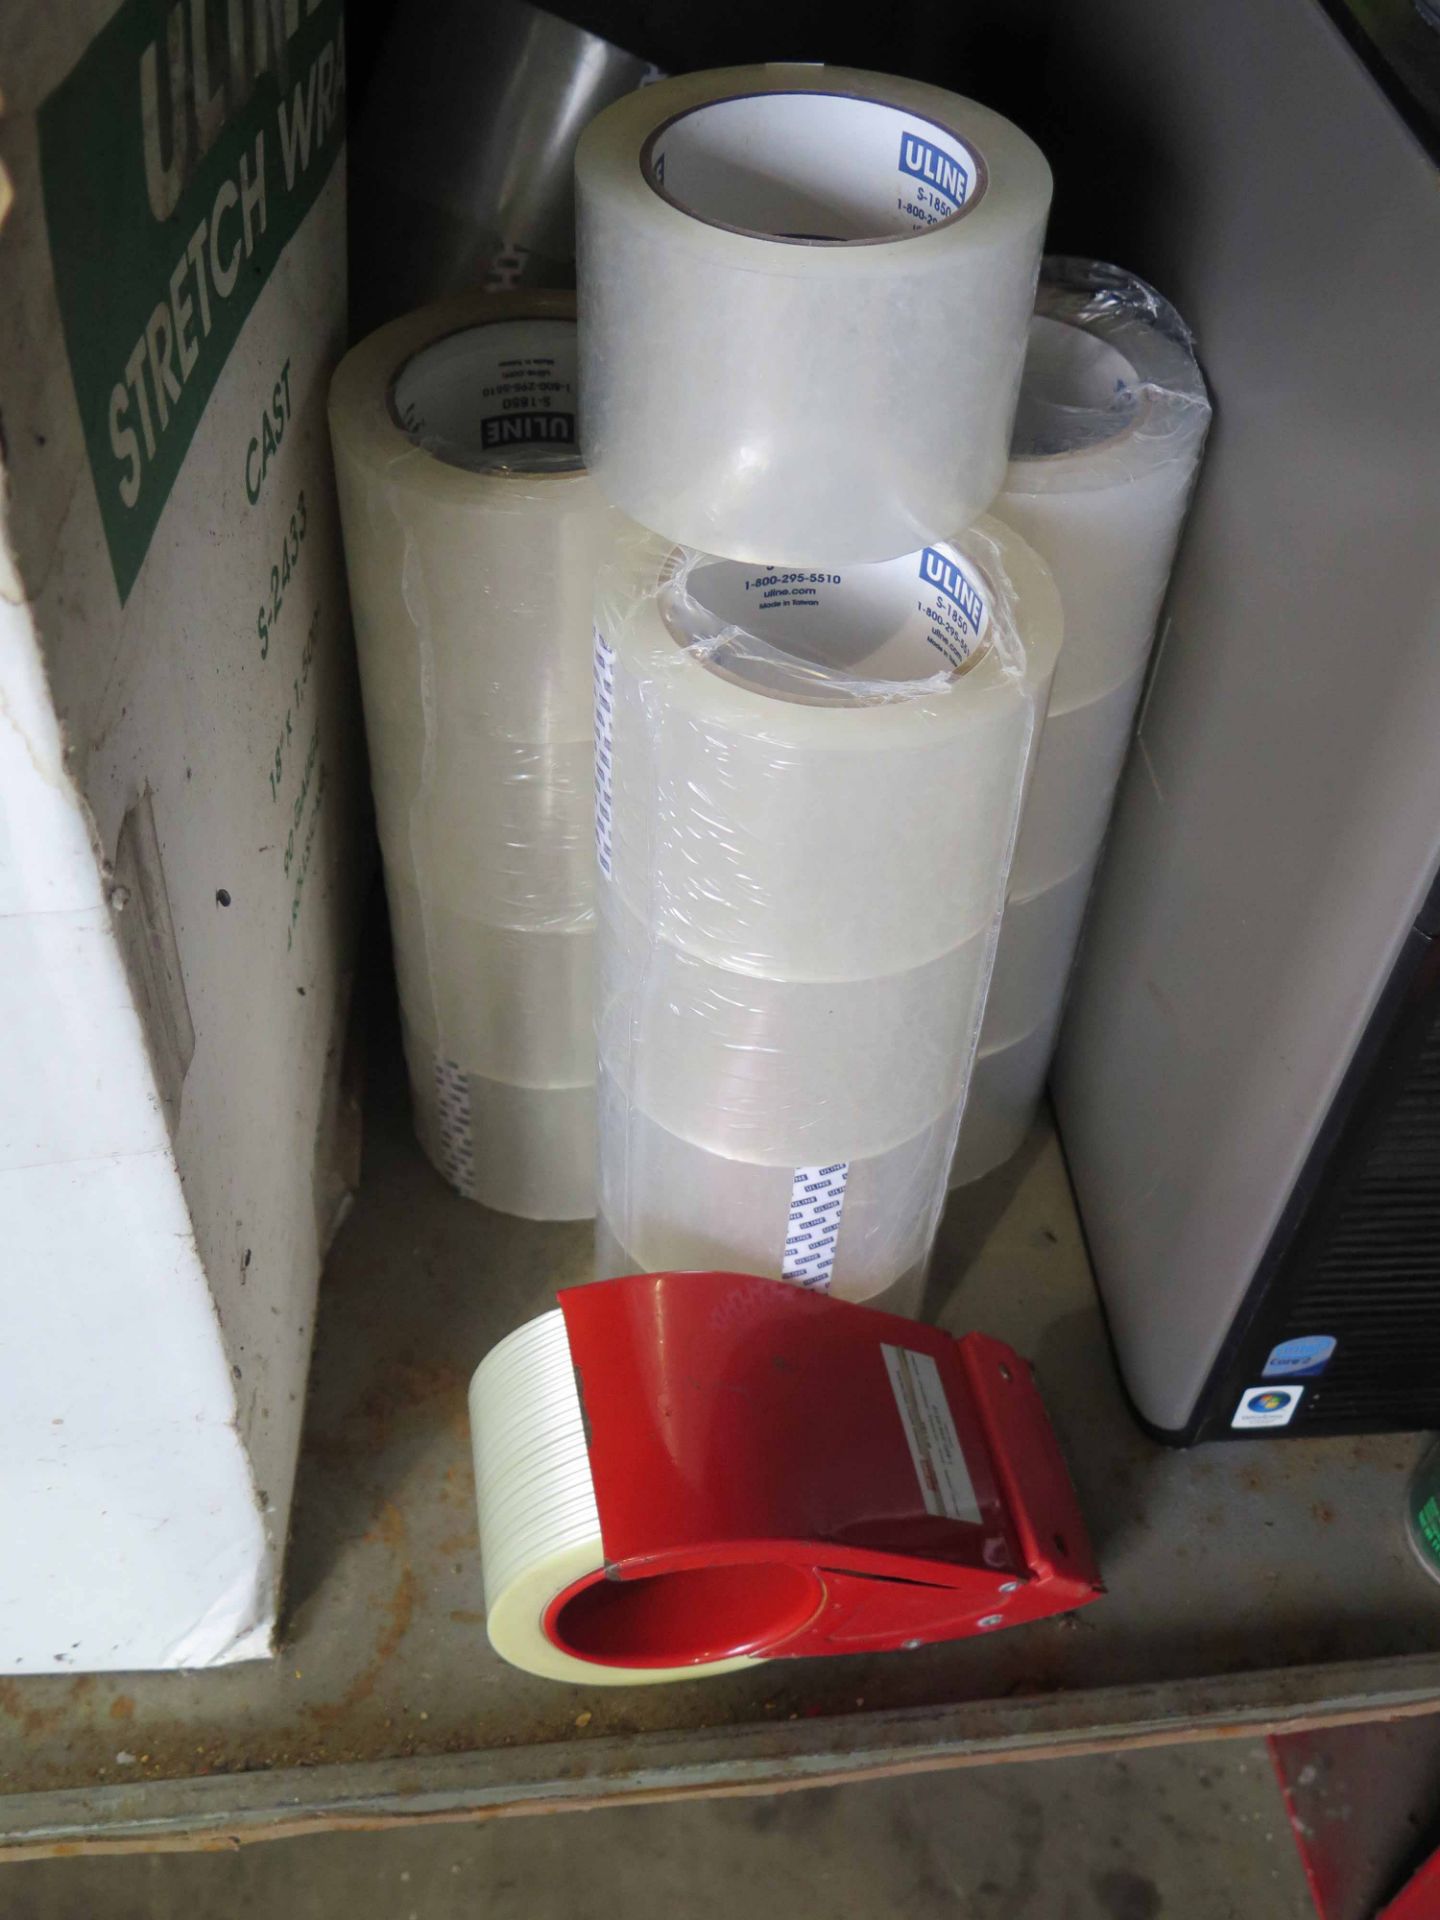 LOT CONSISTING OF: Uline 18" paper roll dispenser, plastic cable ties, rolls of shrink wrap, - Image 3 of 3